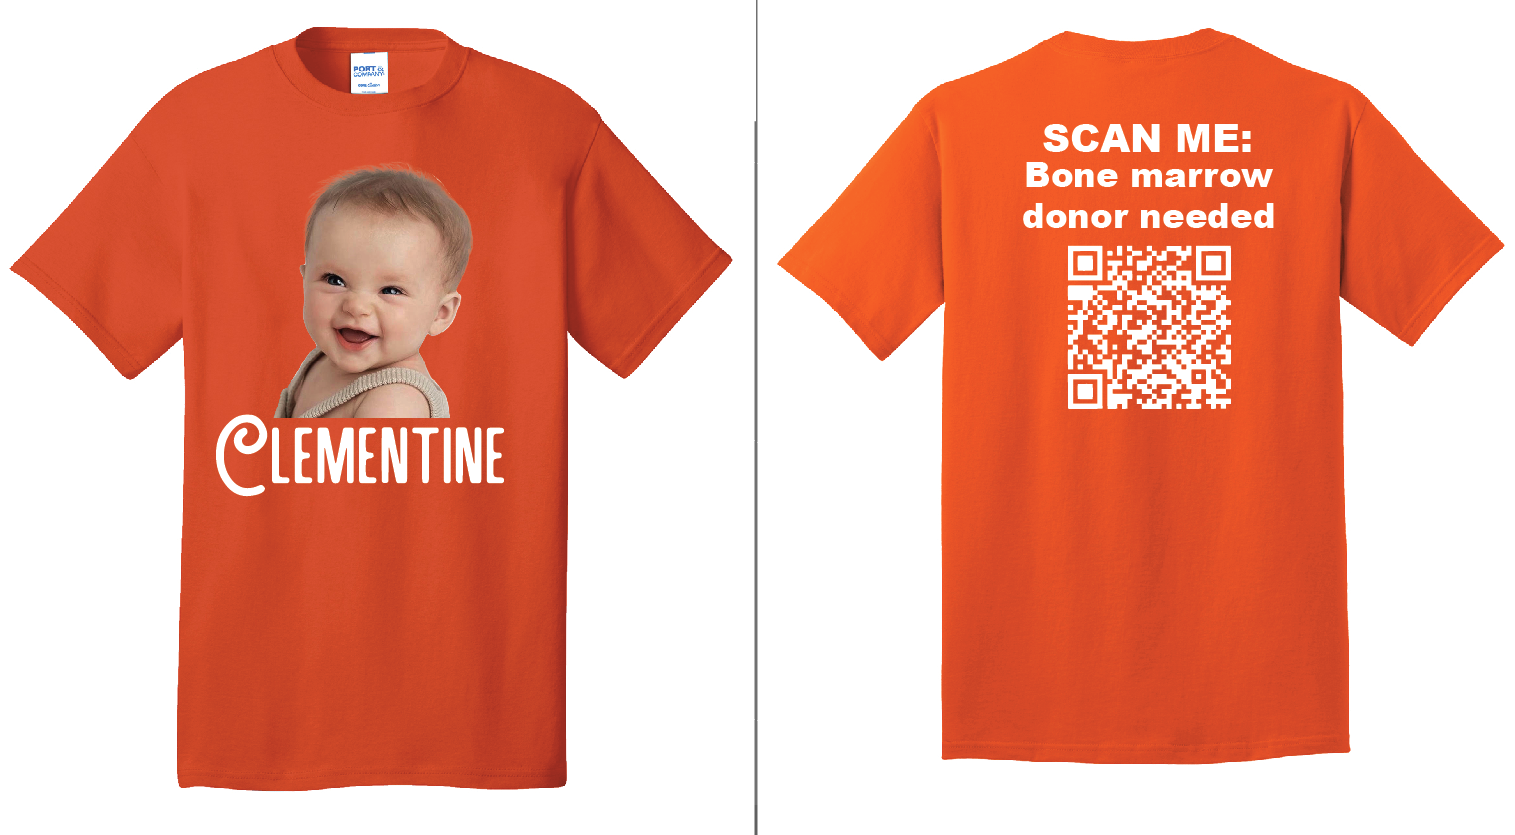 QR code to scan for Clementine's donor website